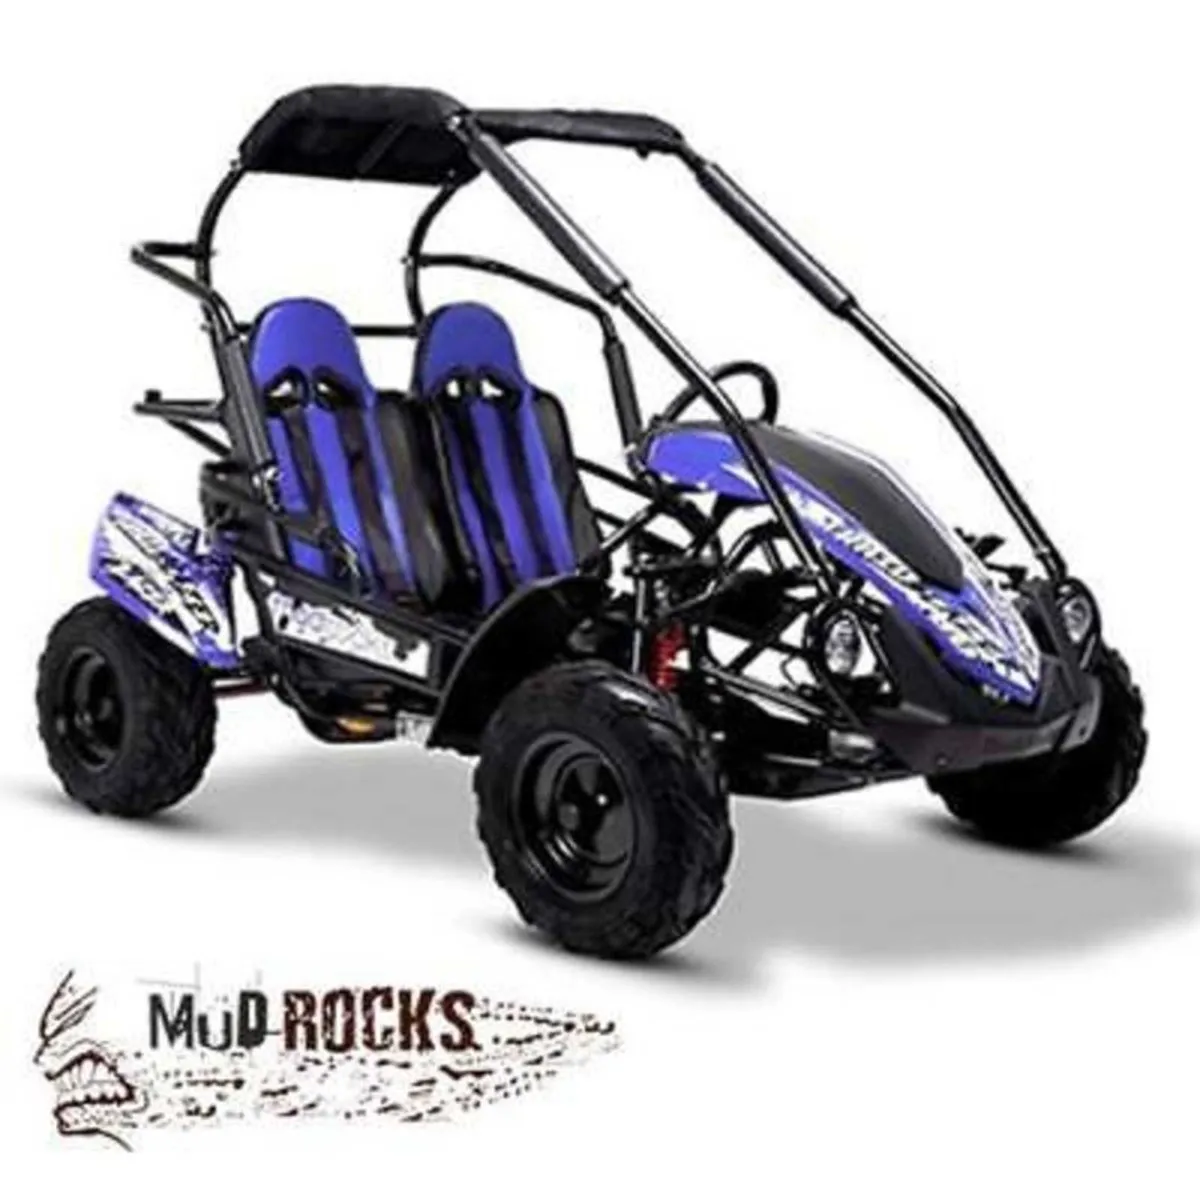 MUDROCKS gt 200 FAMILY size buggy DELIVERY - Image 1